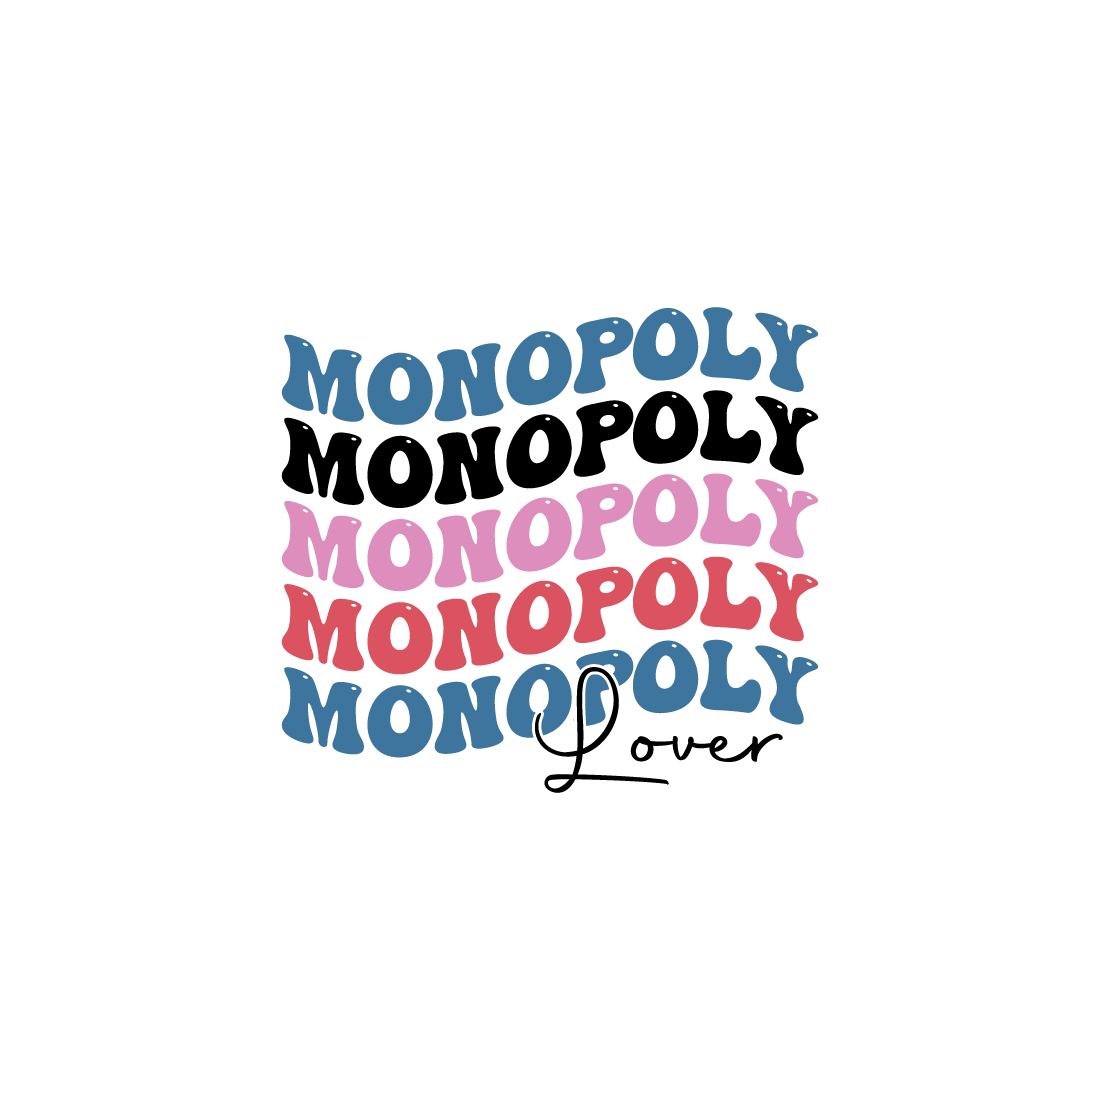 Monopoly lover indoor game retro typography design for t-shirts, cards, frame artwork, phone cases, bags, mugs, stickers, tumblers, print, etc preview image.